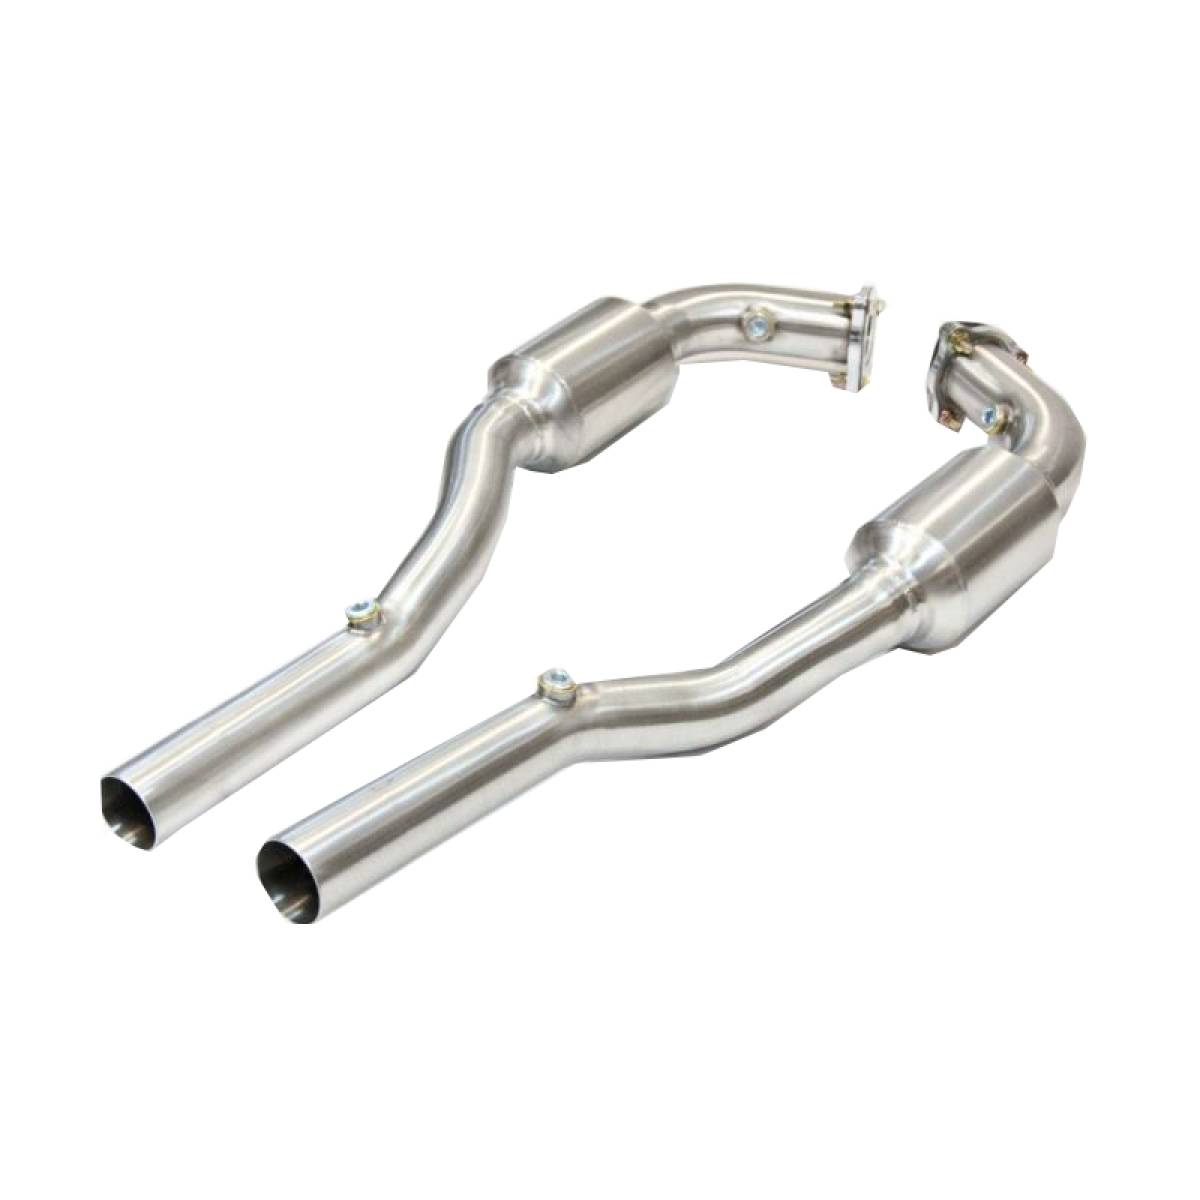 PORSCHE 911 996 997.1 CARRERA 200 CELL EXHAUST SPORTS CATS Pipe Dynamics Performance Exhaust